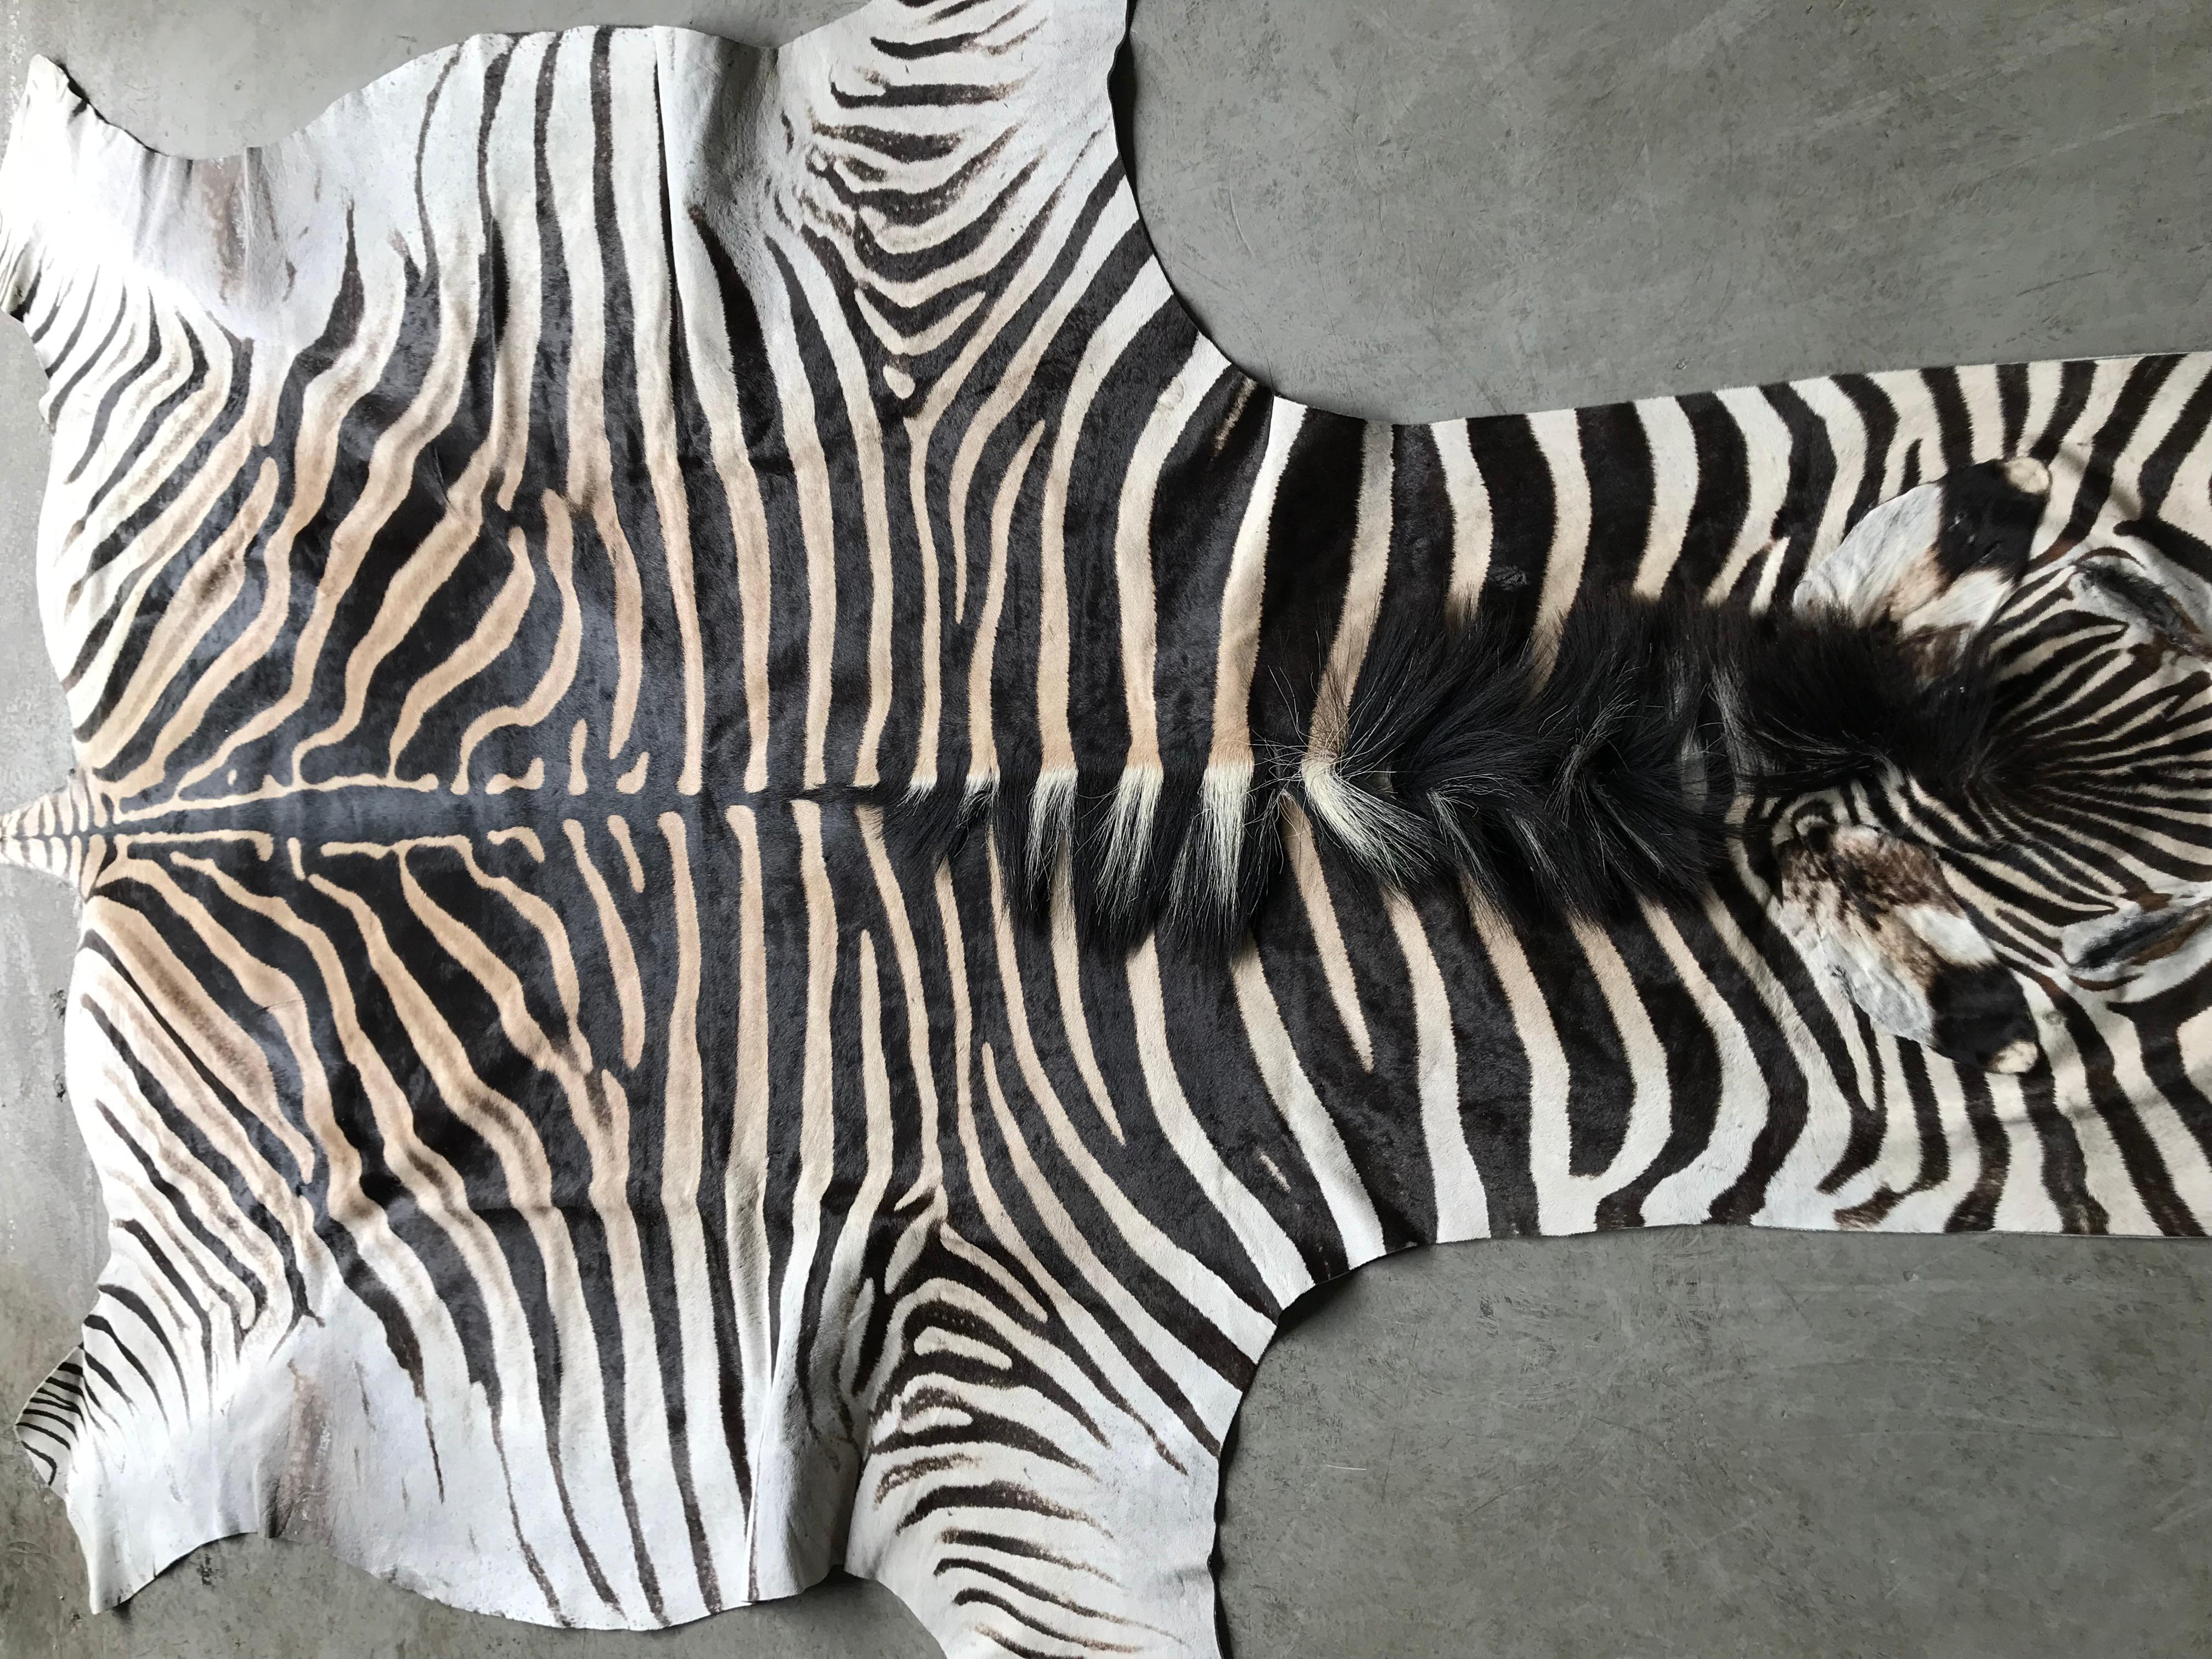 Superb quality burchell zebra huid
This hide has been hand-selected and meets our high standards of quality.
Excellent tanning makes this hide very soft and ideal to be used as a rug.
The hide has a luxurious appearance and great color. Great